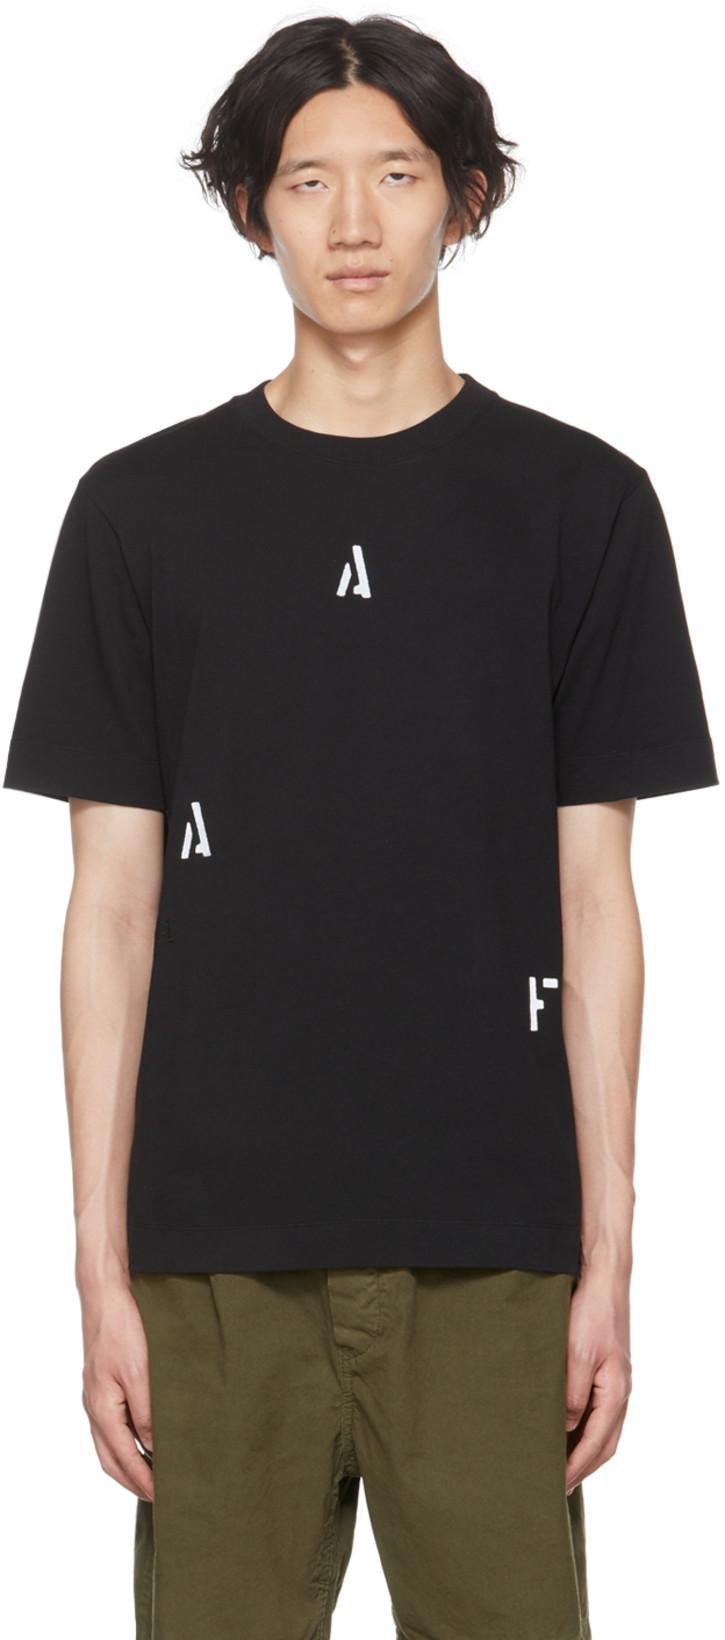 Black LM1-1 T-Shirt by APPLIED ART FORMS